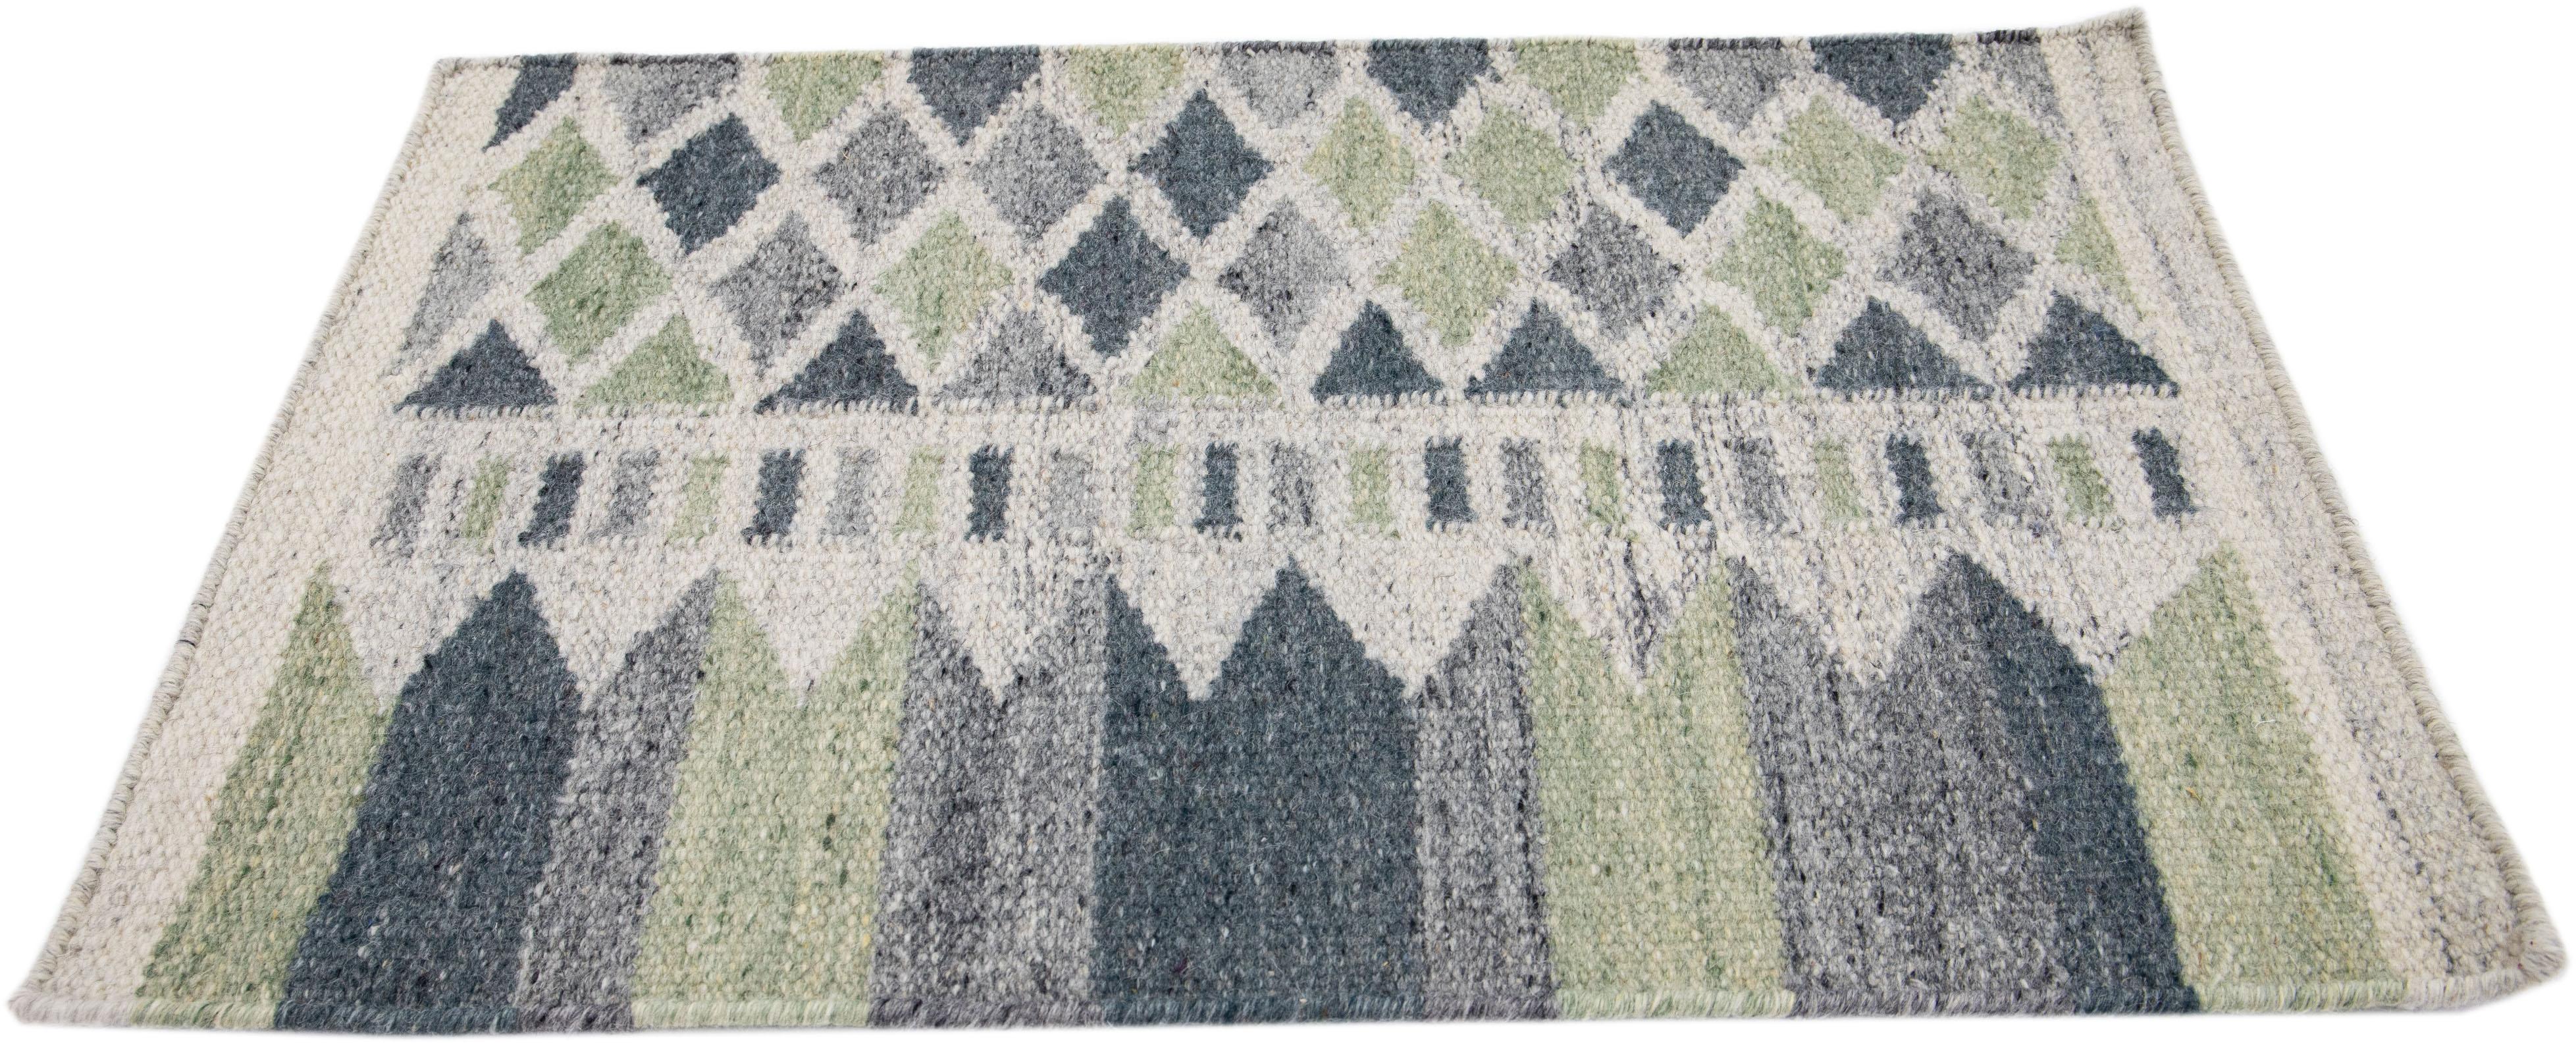 Apadana's Modern Swedish Style wool custom rug. Custom sizes and colors made-to-order.

Material: Wool.
Techniques: Hand-Woven.
Style: Modern Swedish.
Lead time: Approx. 15-16 weeks available.
Colors: As shown, other custom colors are